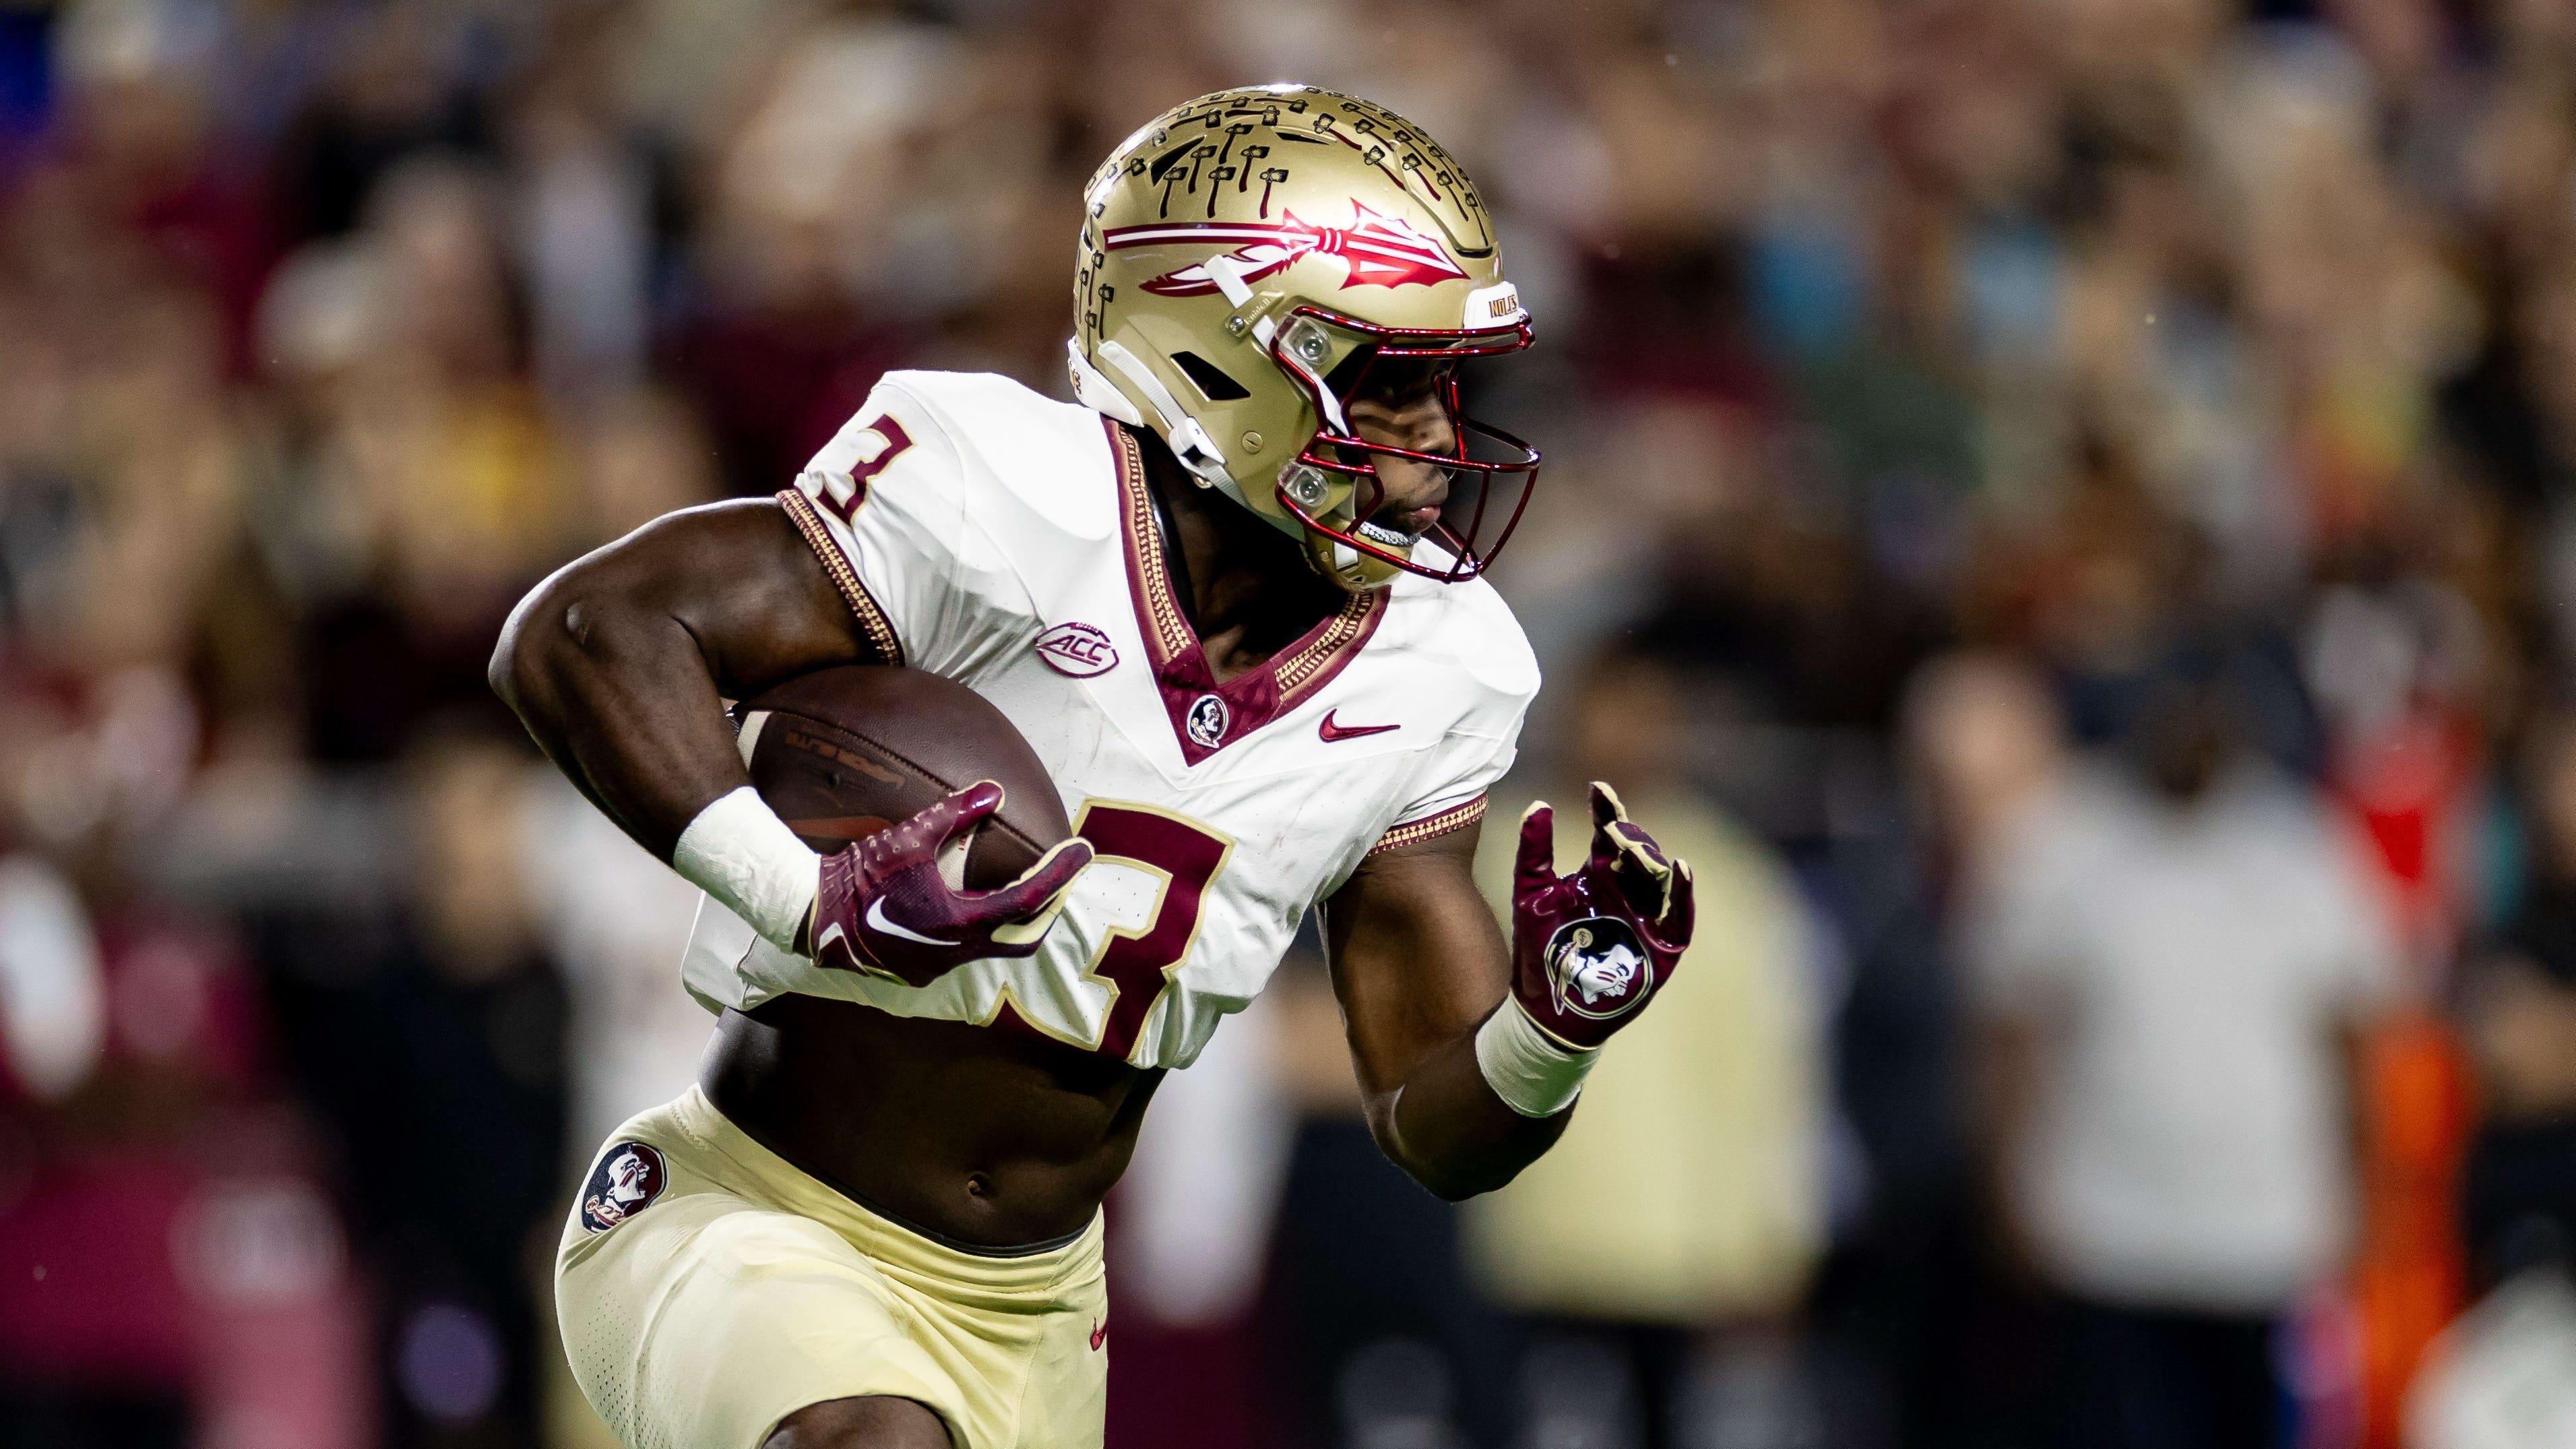 Buffalo Bills Host Draft Visit With Florida State RB Trey Benson; Potential Fit?